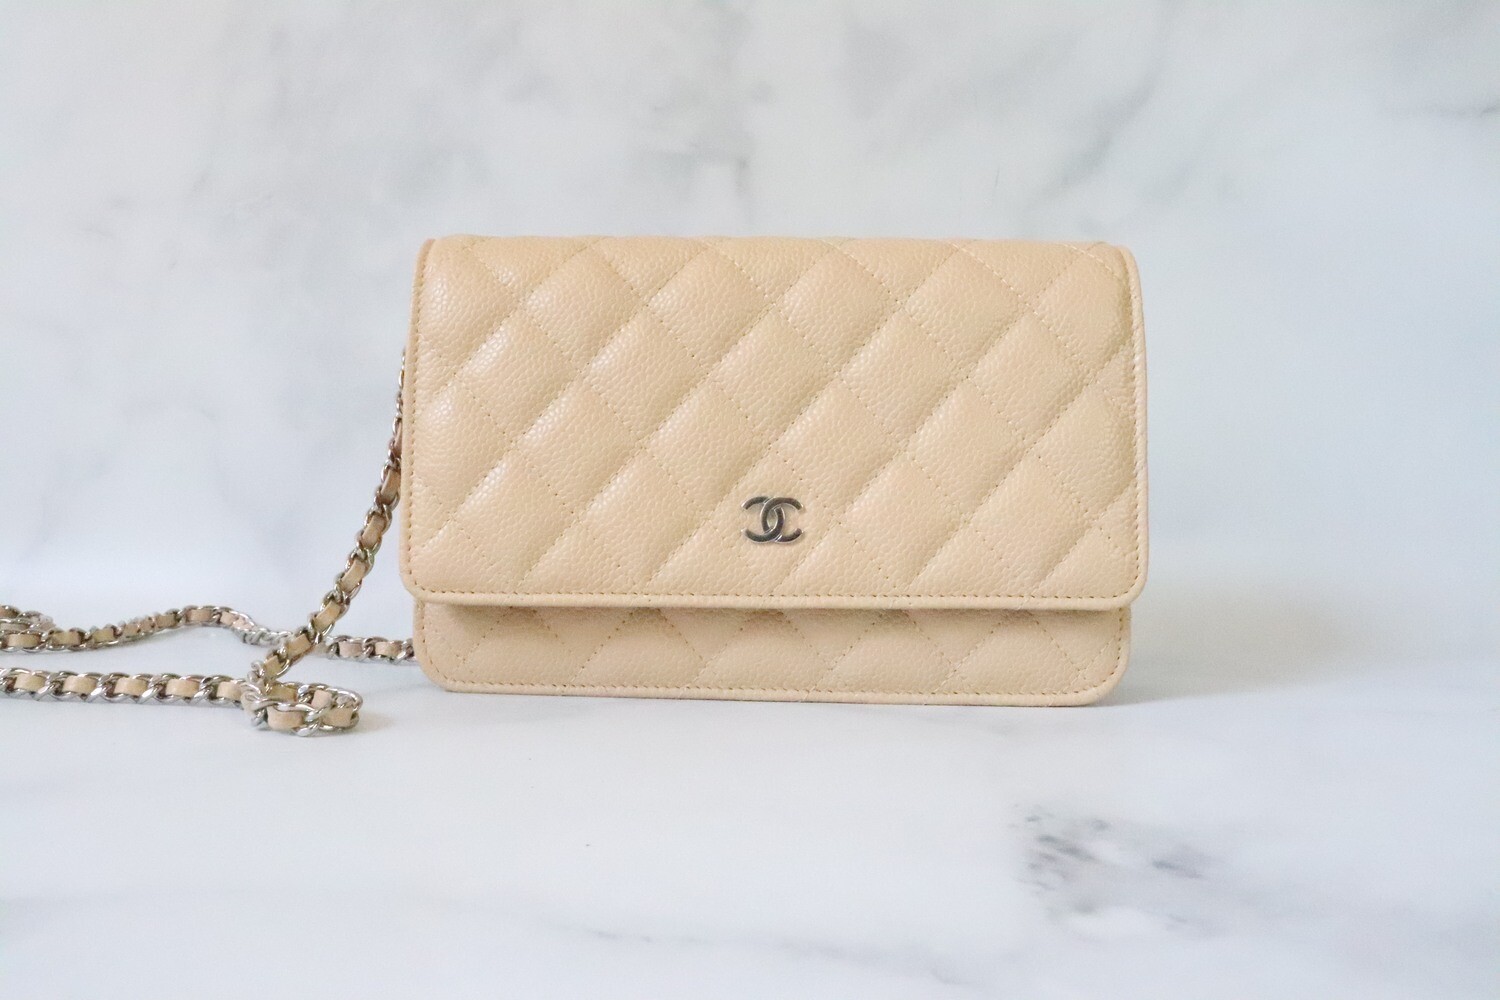 Chanel Wallet on Chain, Beige Caviar Leather, Silver Hardware, New in Box